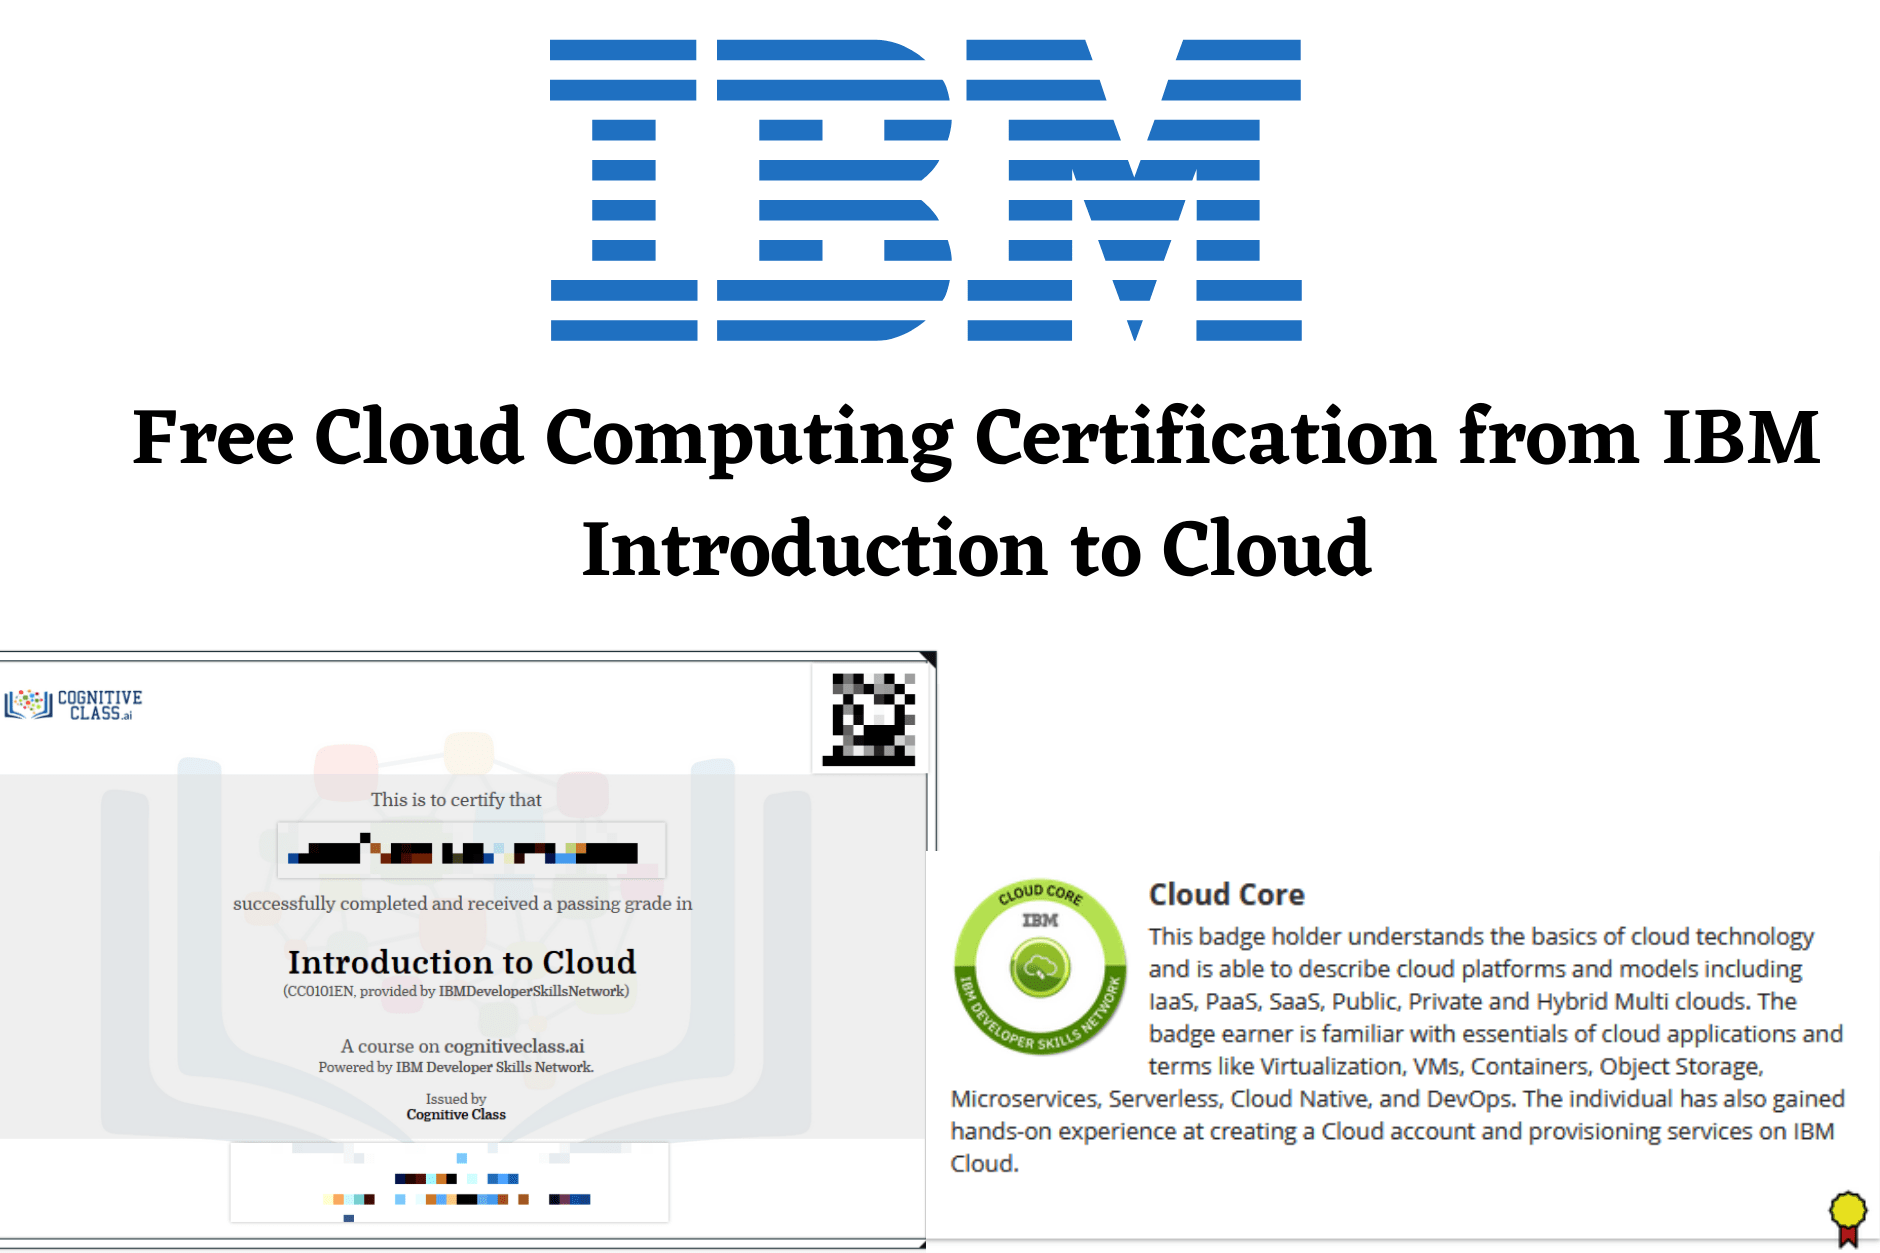 Free Cloud Computing Certification from IBM Introduction to Cloud